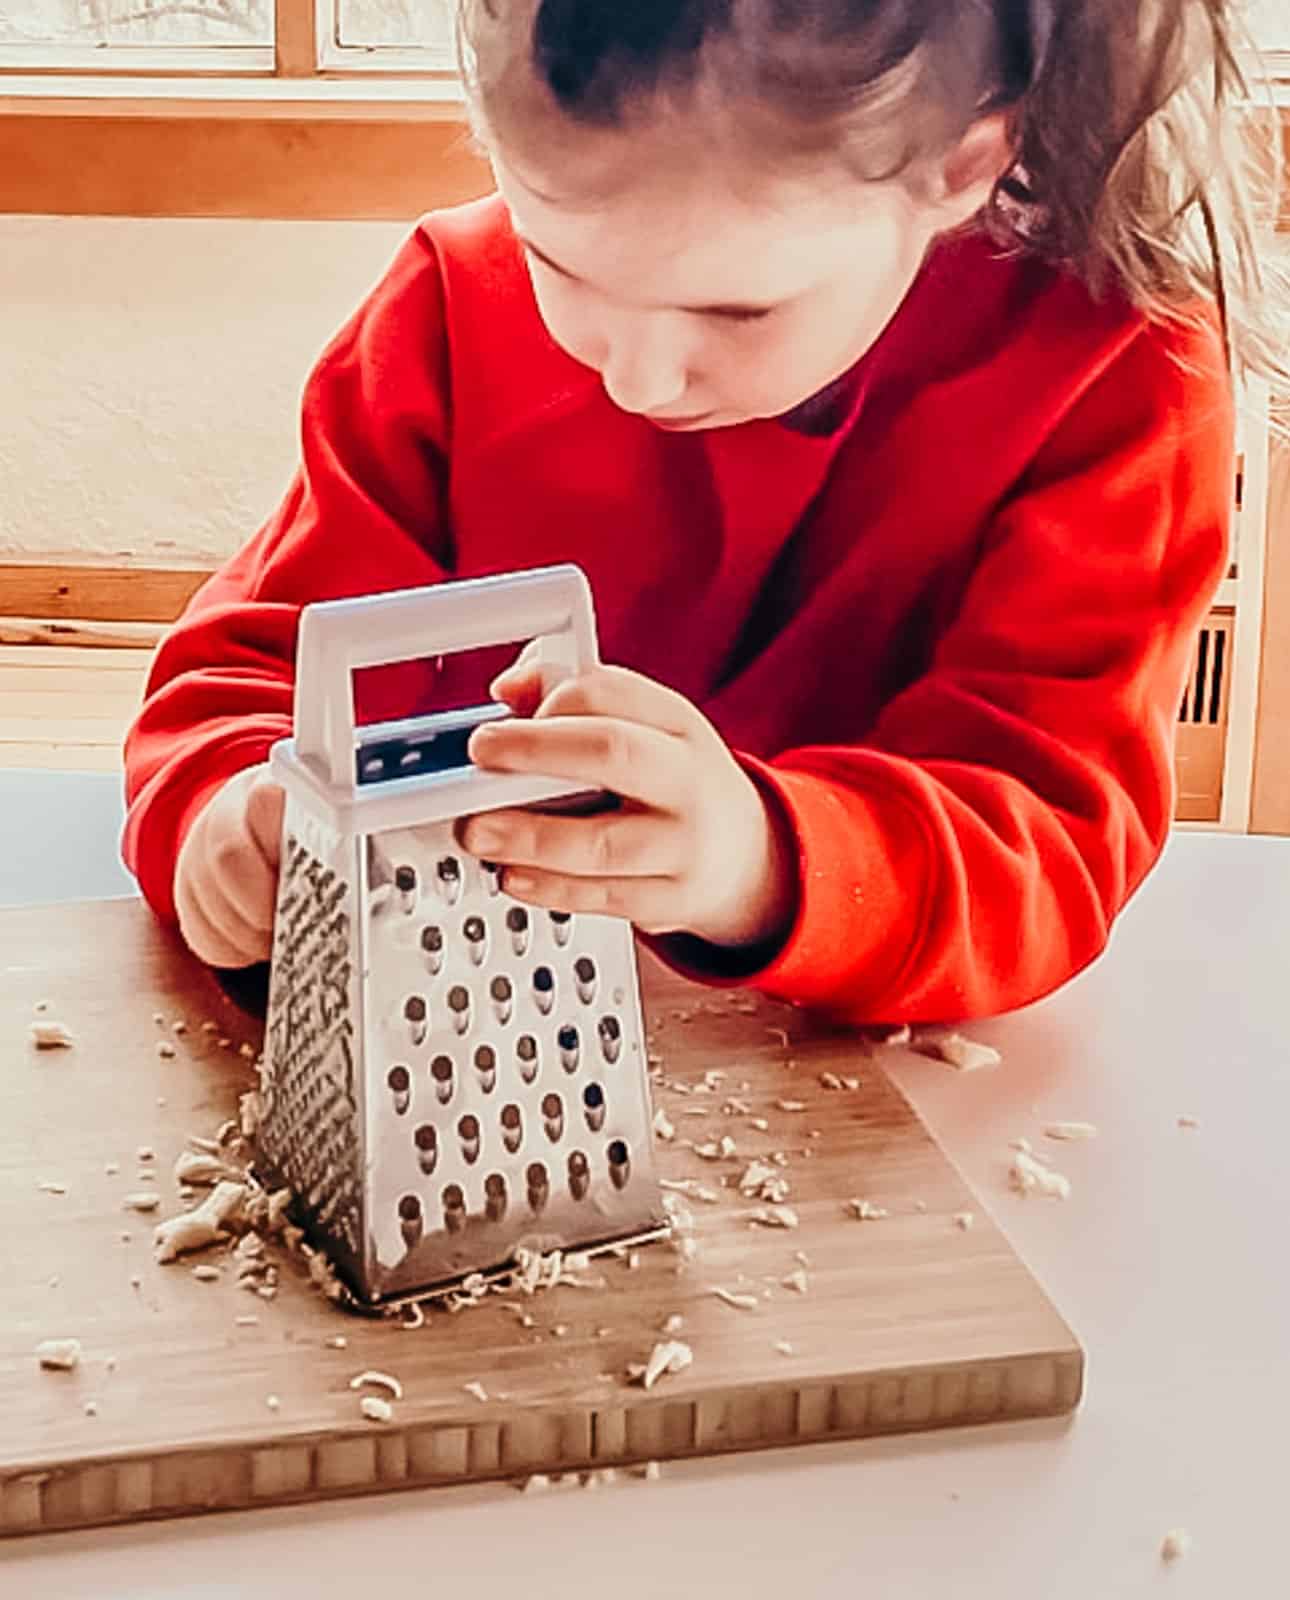 child grating cheese using a box grater and a cutting board